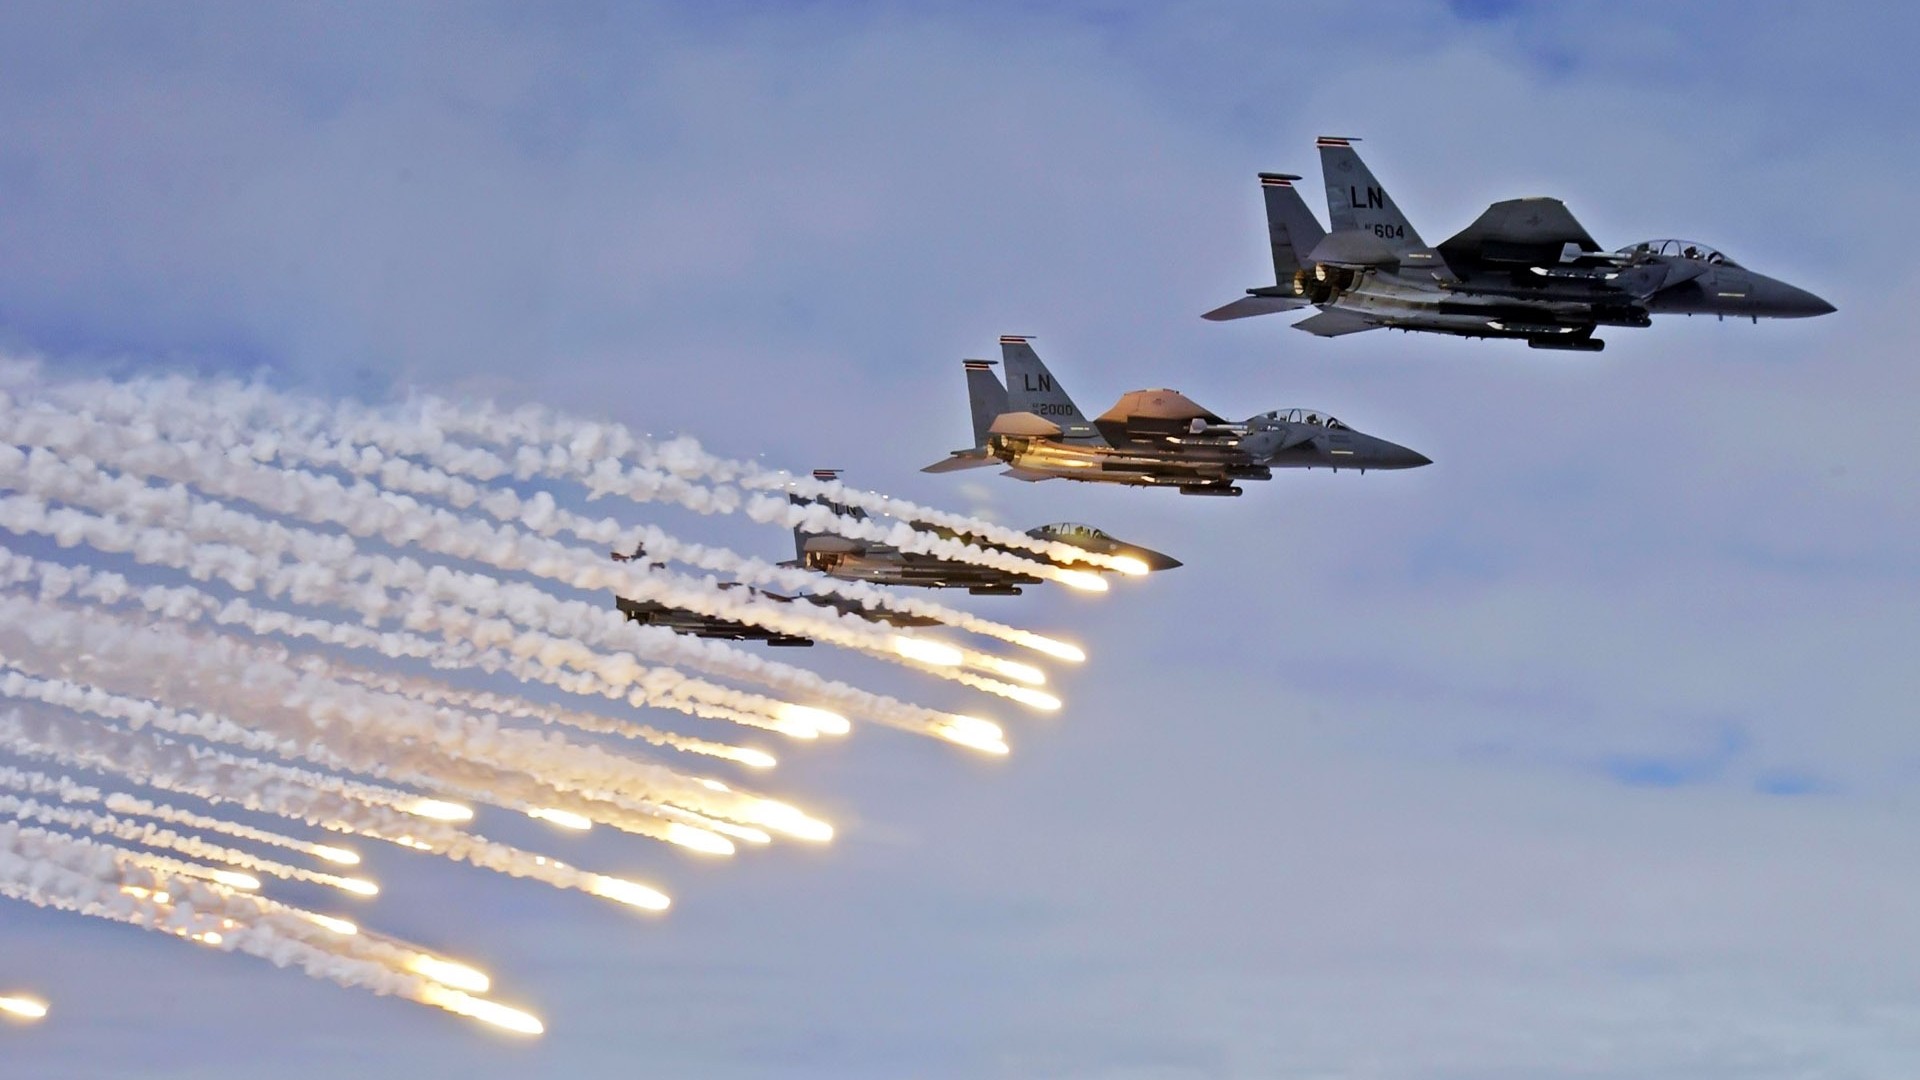 General 1920x1080 military aircraft airplane jets sky contrails military aircraft F-15 Eagle military vehicle vehicle flares